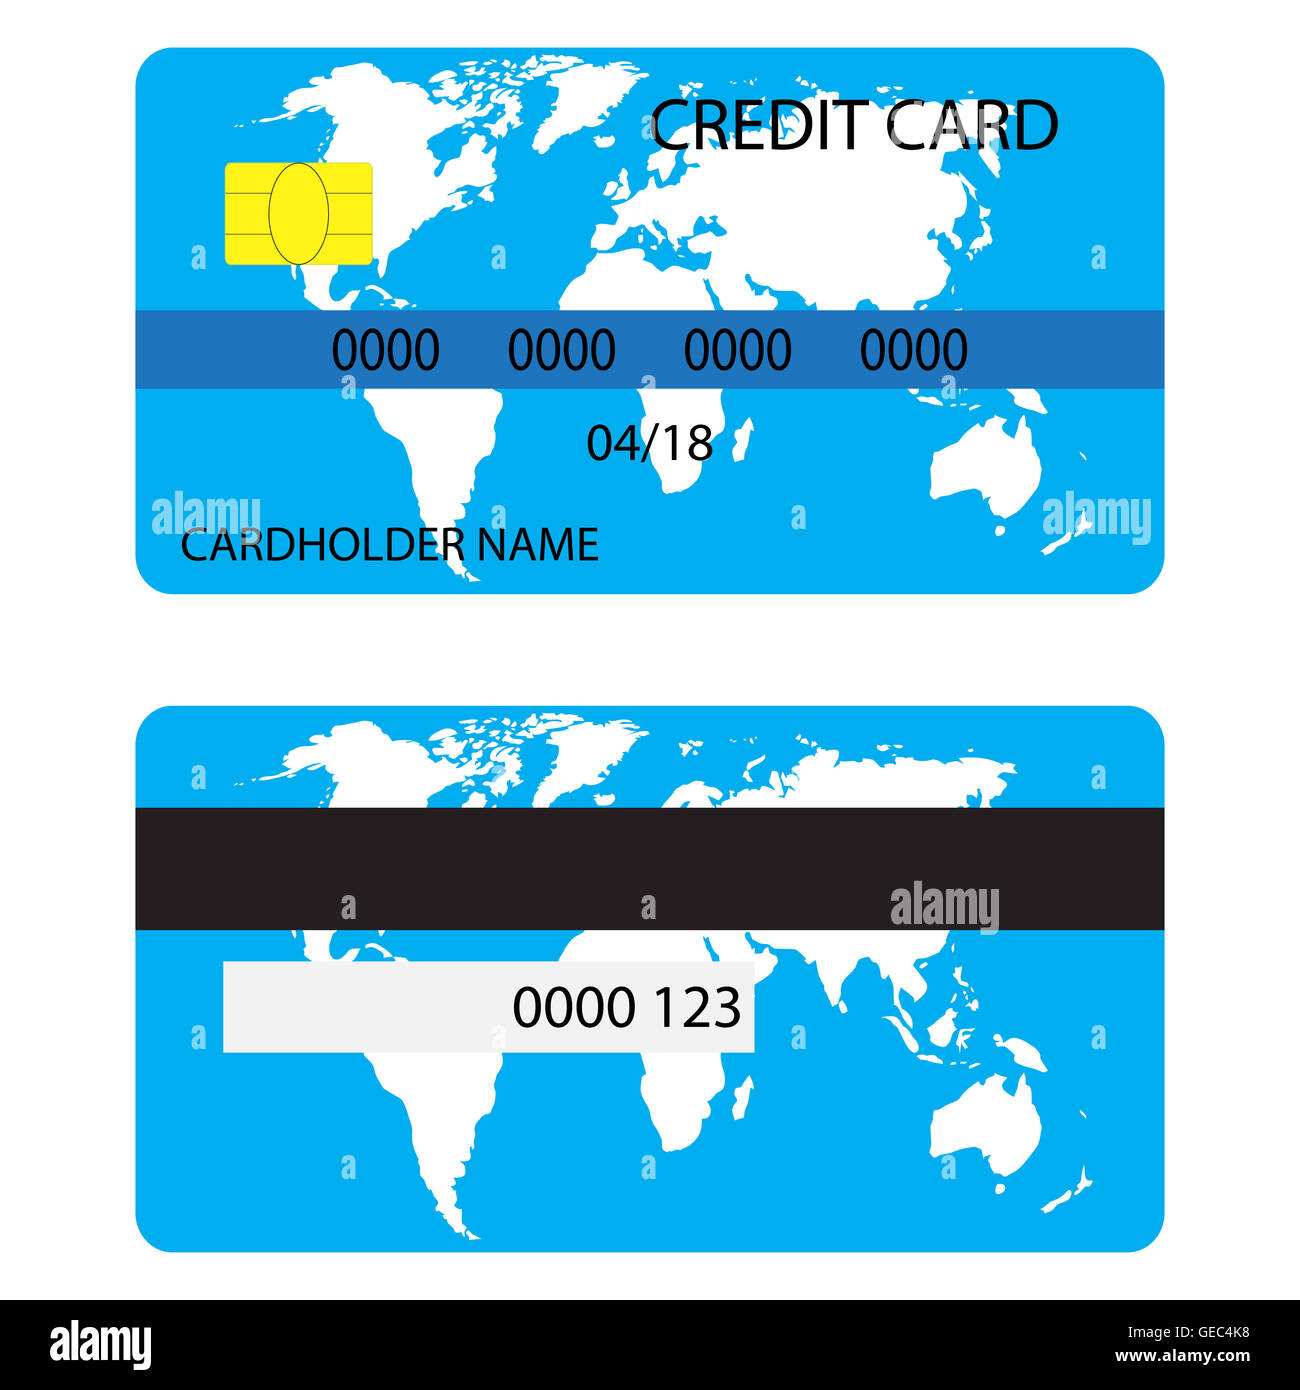 Credit card with world map. Credit card isolated, money card for shopping, vector illustration Stock Photo